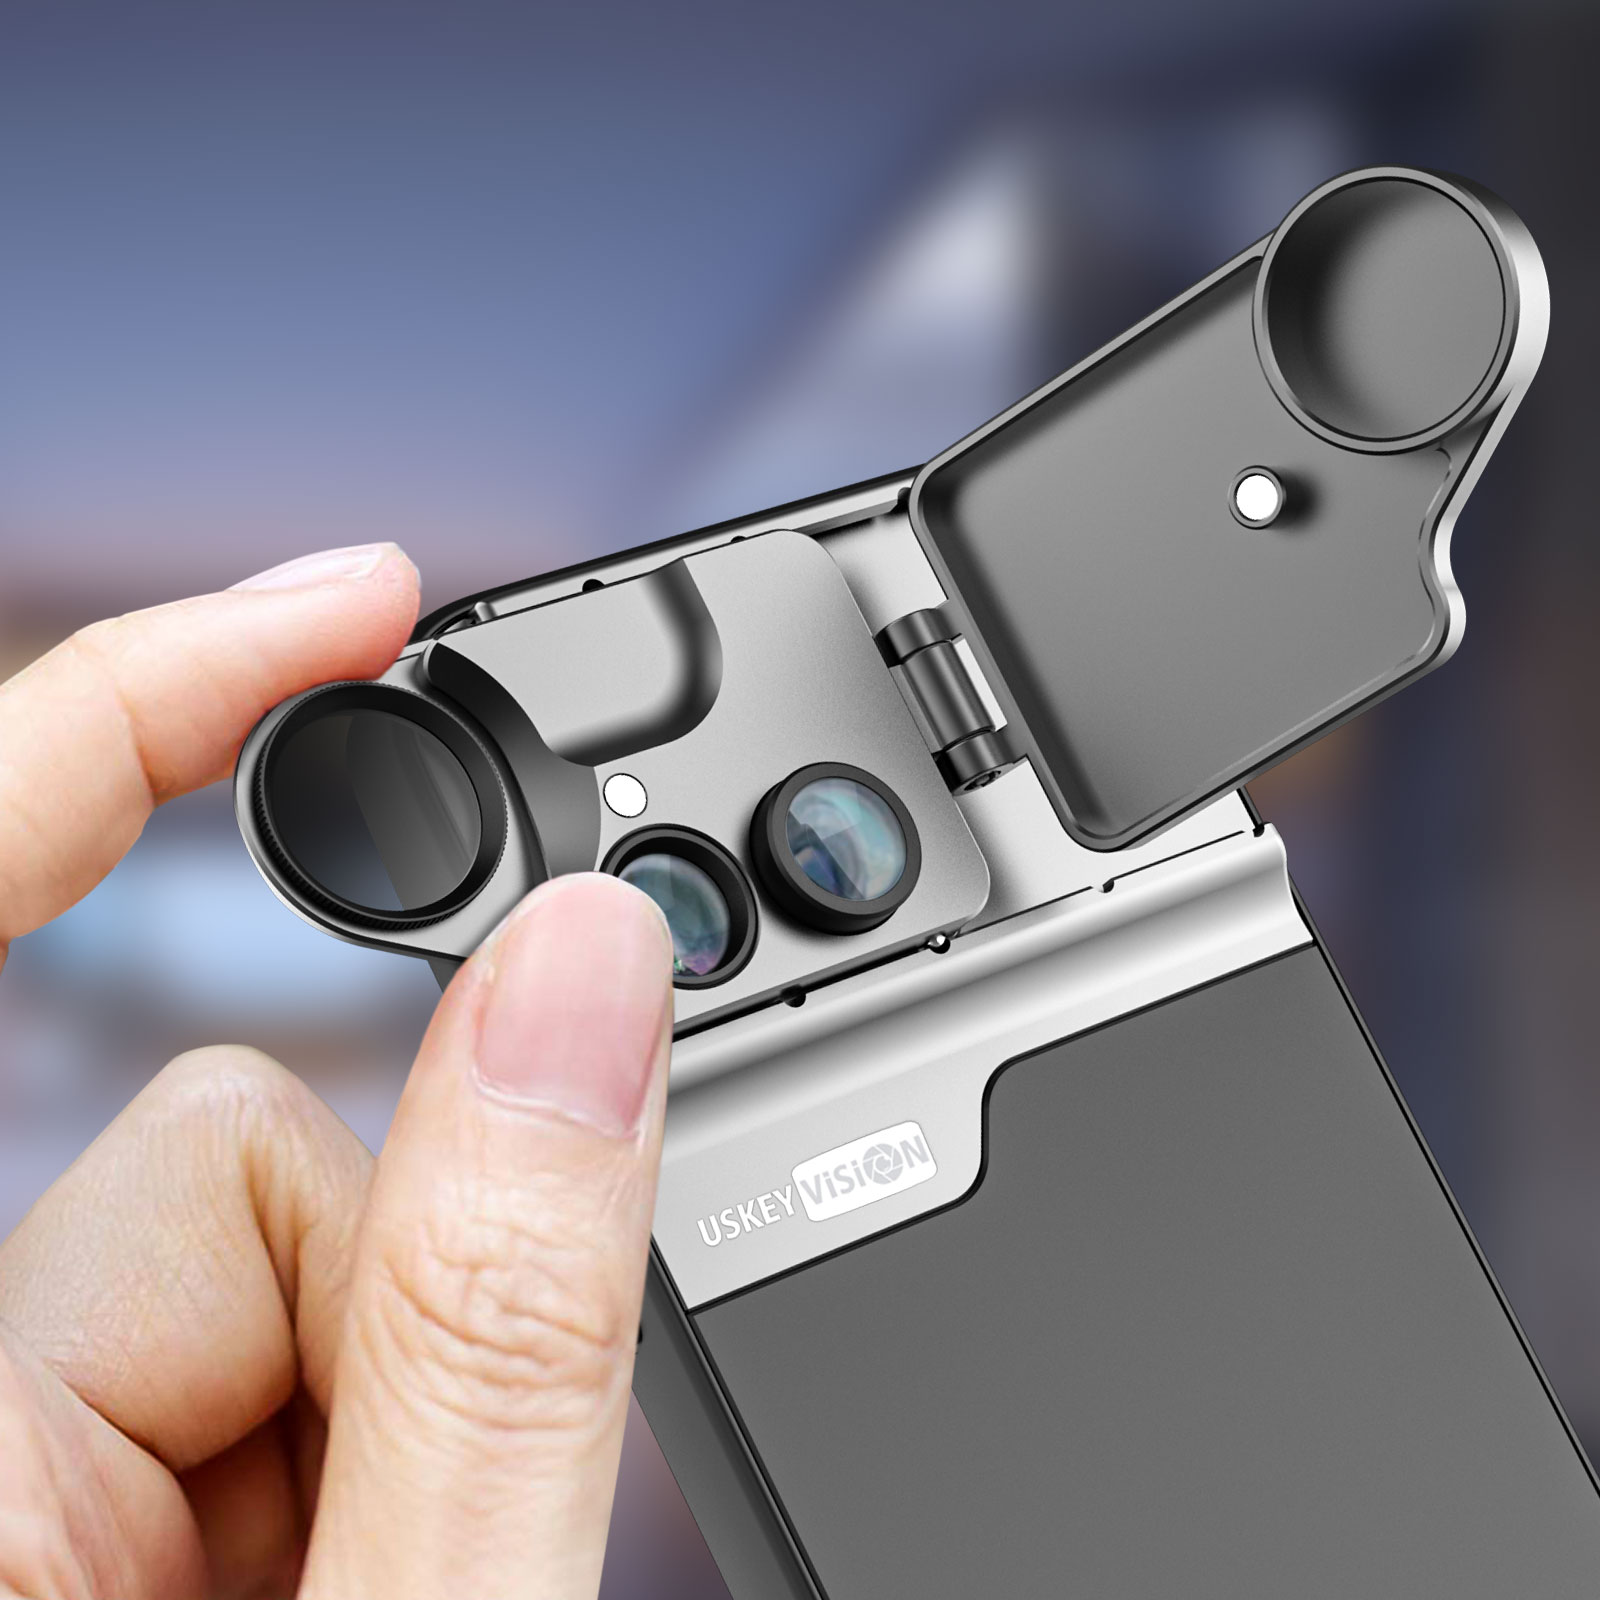 USKEYVISION Multi Phone Camera Lens for iPhone 12 Pro Max 180° Fisheye Lens for iPhone 12 Pro Max Smartphone Accessories UVMC-Max CPL Filter+10X 20X Macro+2X Telephoto